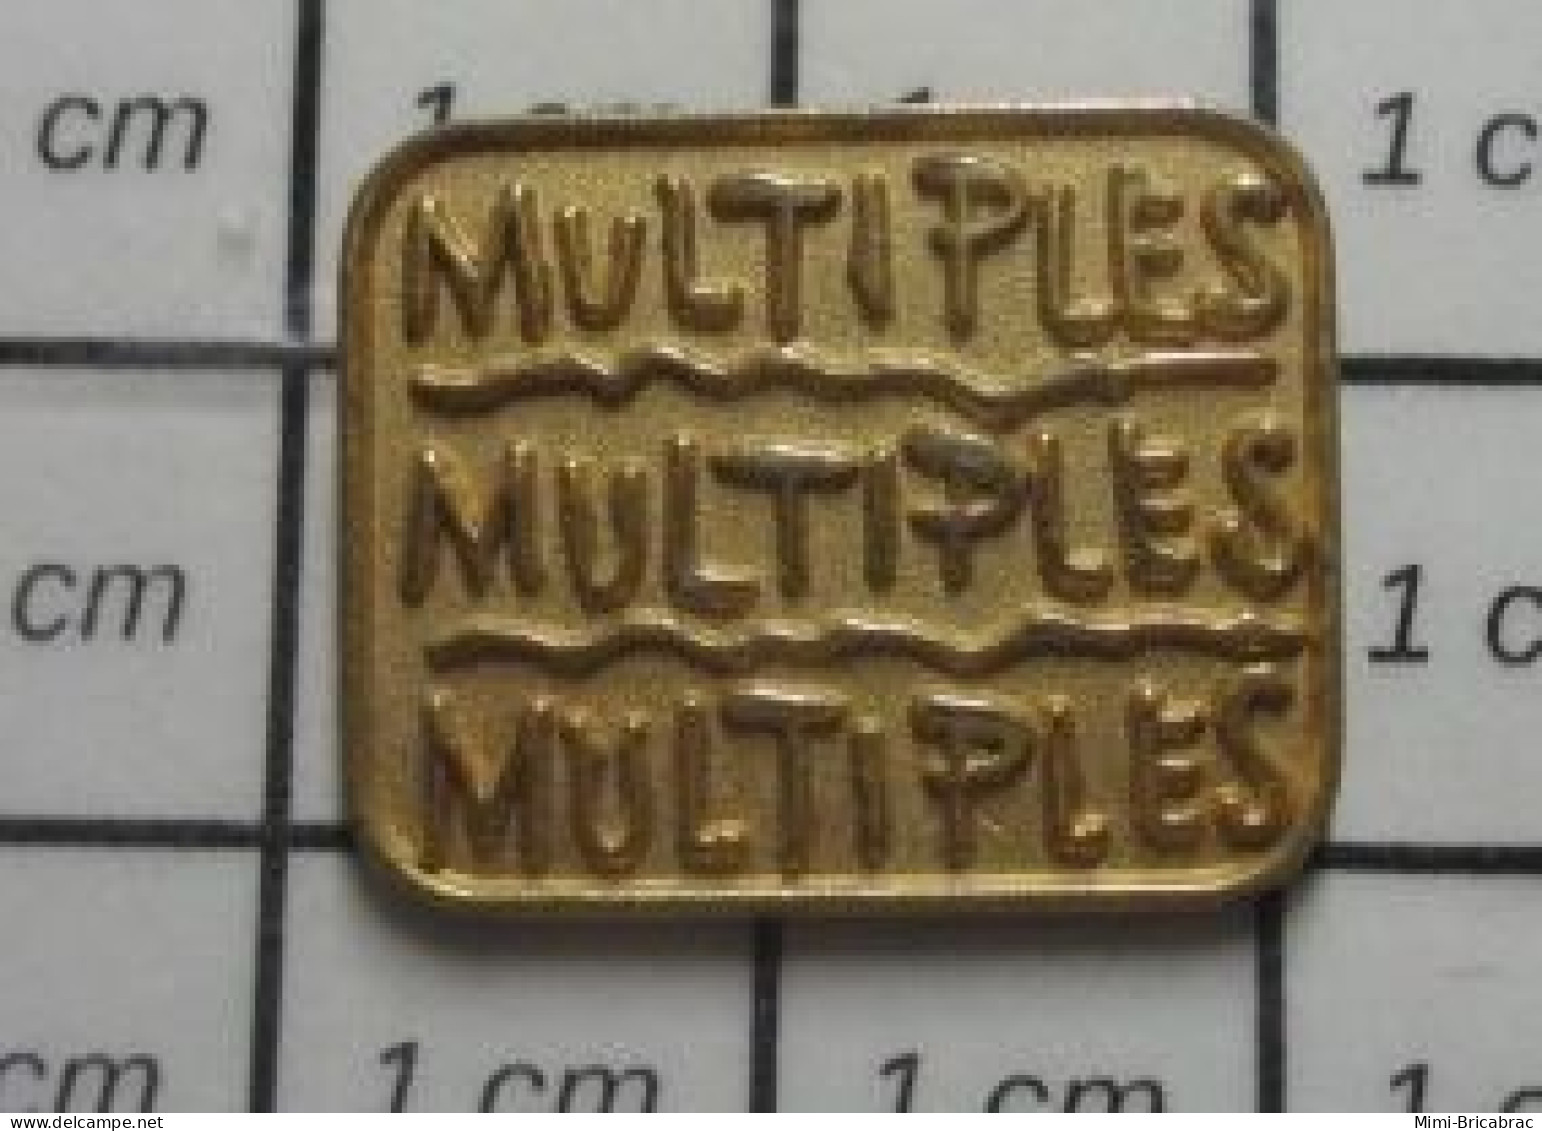 912E Pin's Pins / Beau Et Rare / MARQUES / TOUT METAL JAUNE MULTIPLES MULTIPLES MULTIPLES Ok On A Compris ! - Trademarks